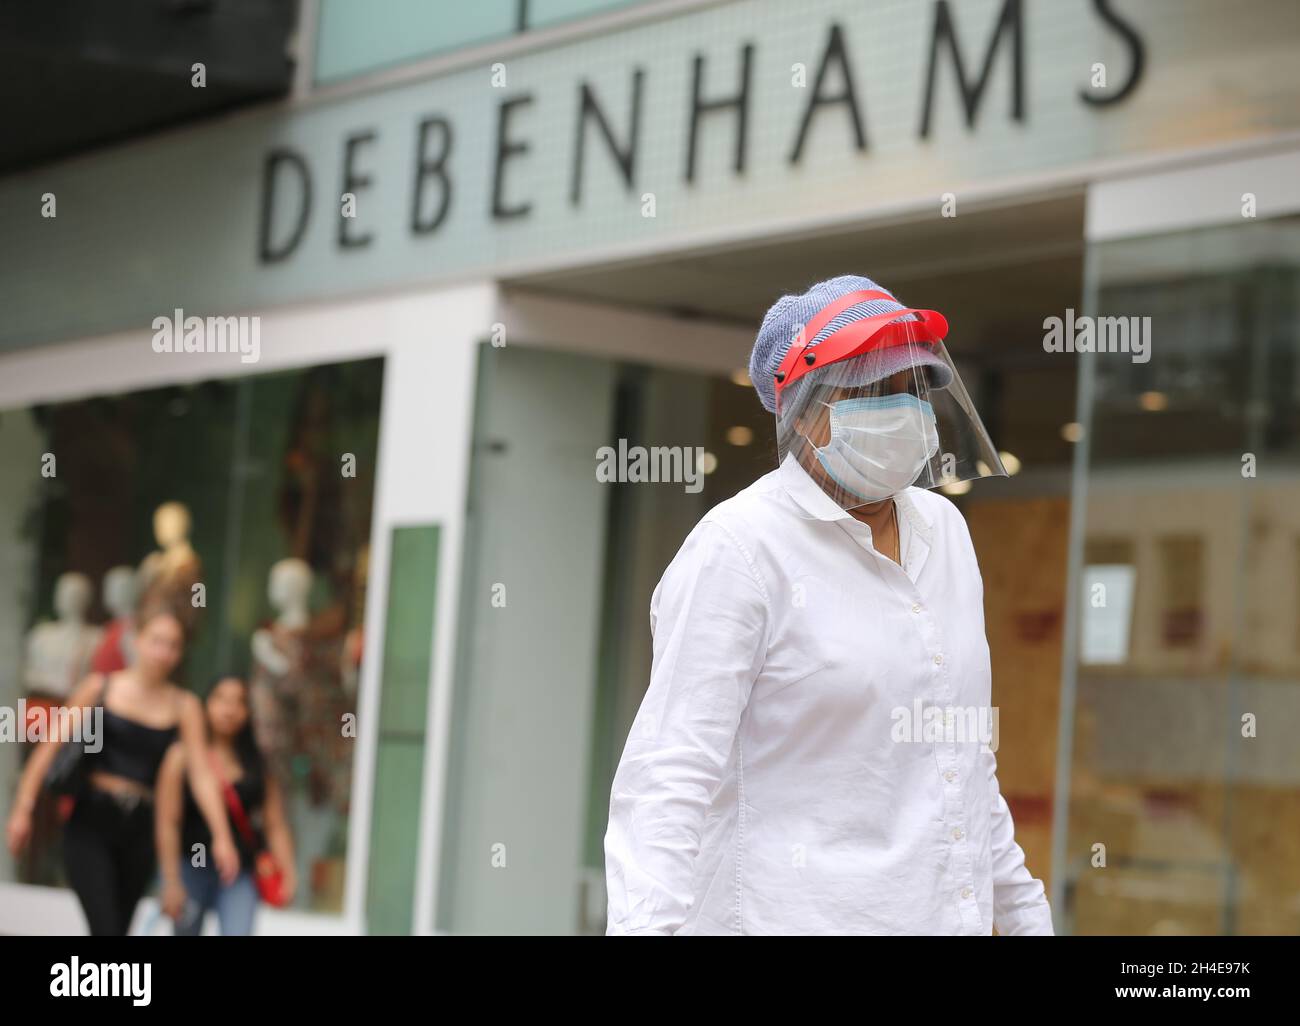 A shopper wearing a protective visor walks past a closed Debenhams store on Oxford Street, London, as non-essential shops in England open their doors to customers for the first time since coronavirus lockdown restrictions were imposed in March. Picture date: Monday June 15, 2020. Stock Photo